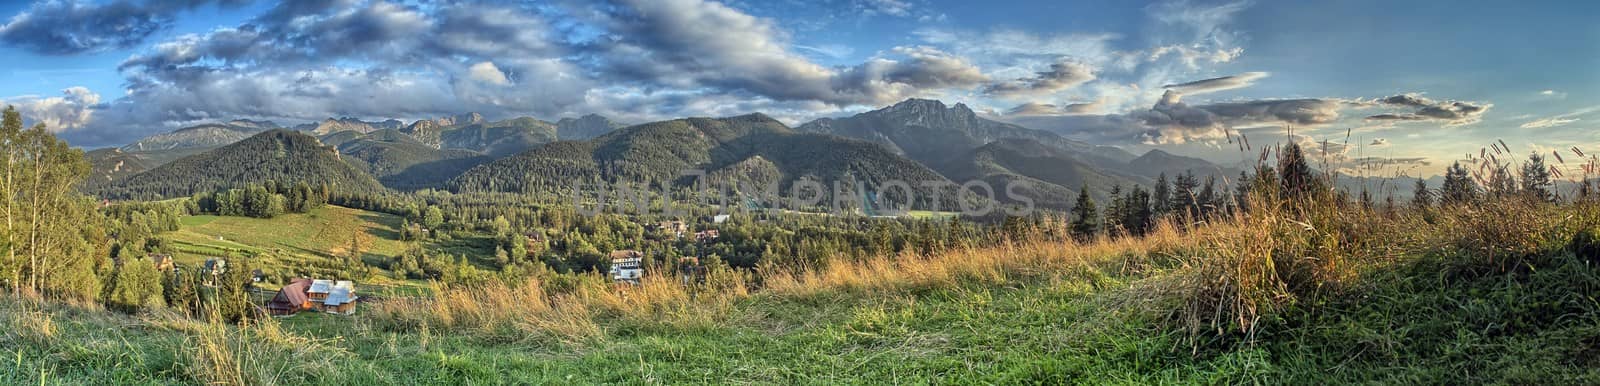 Tatra Mountains - Panorama with view on Giewont by sanzios